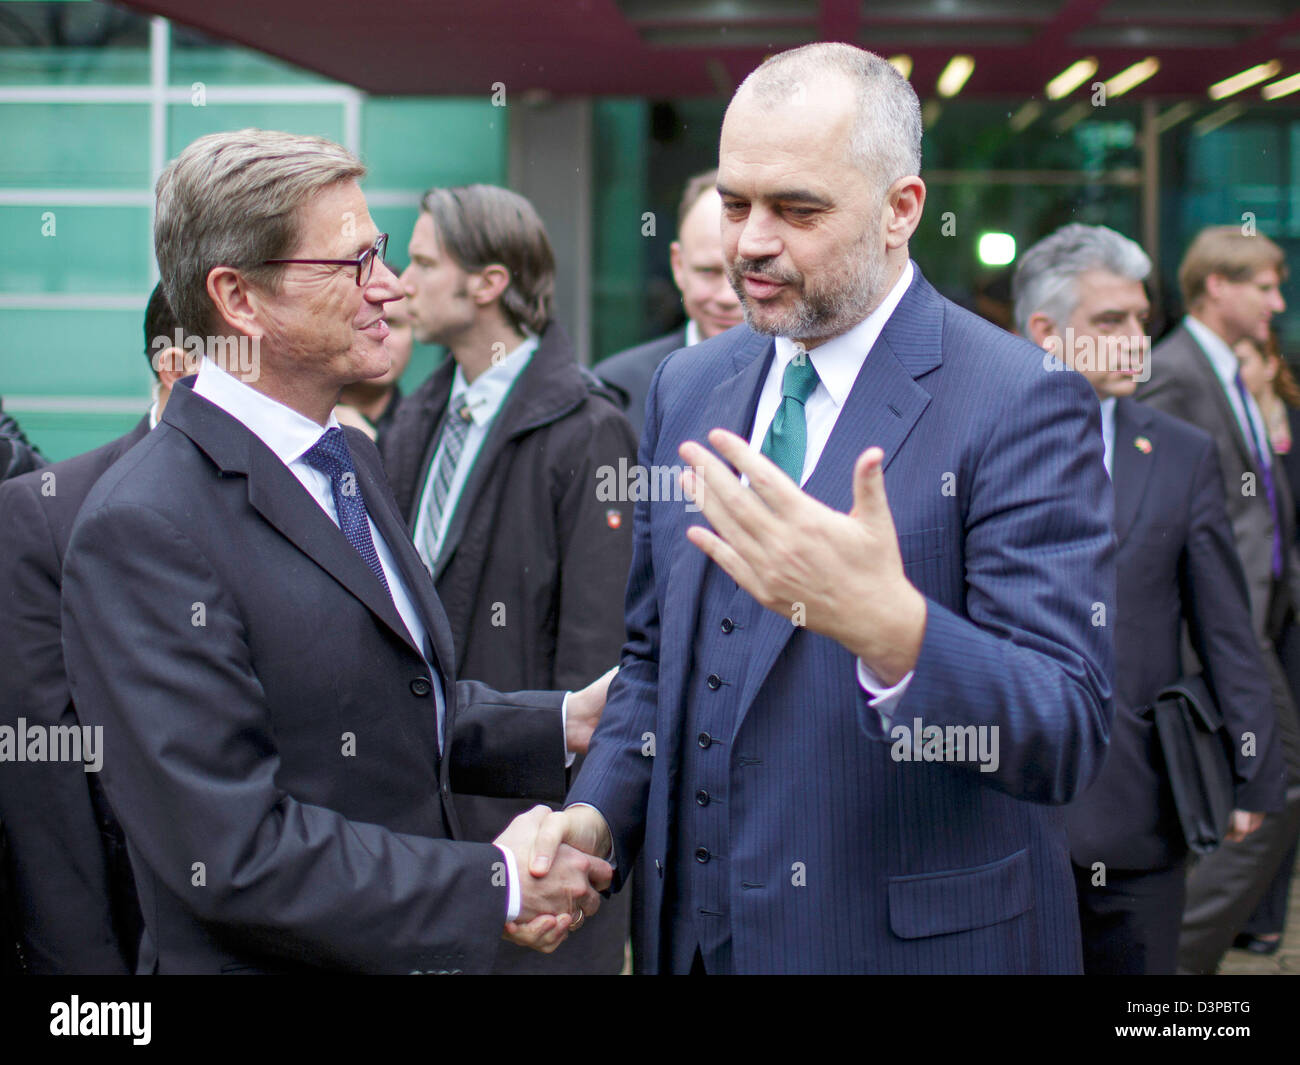 HANDOUT: Tirana, Albania. 22nd February 2013.  A handout picture shows German Foreign Minister Guido Westerwelle (FDP, L) meeting the leader of the Albanian Socialist Party, Edi Rama, during a visit of Westerwelle in Tirana, Albania, 22 February 2013. Westerwelle continues his visit to Albania and Macedonia. Both states would like to join the European Union (EU). Photo: THOMAS TRUTSCHEL/ PHOTOTHEK.NET / AUSWAERTIGES AMT/dpa/Alamy Live News Stock Photo